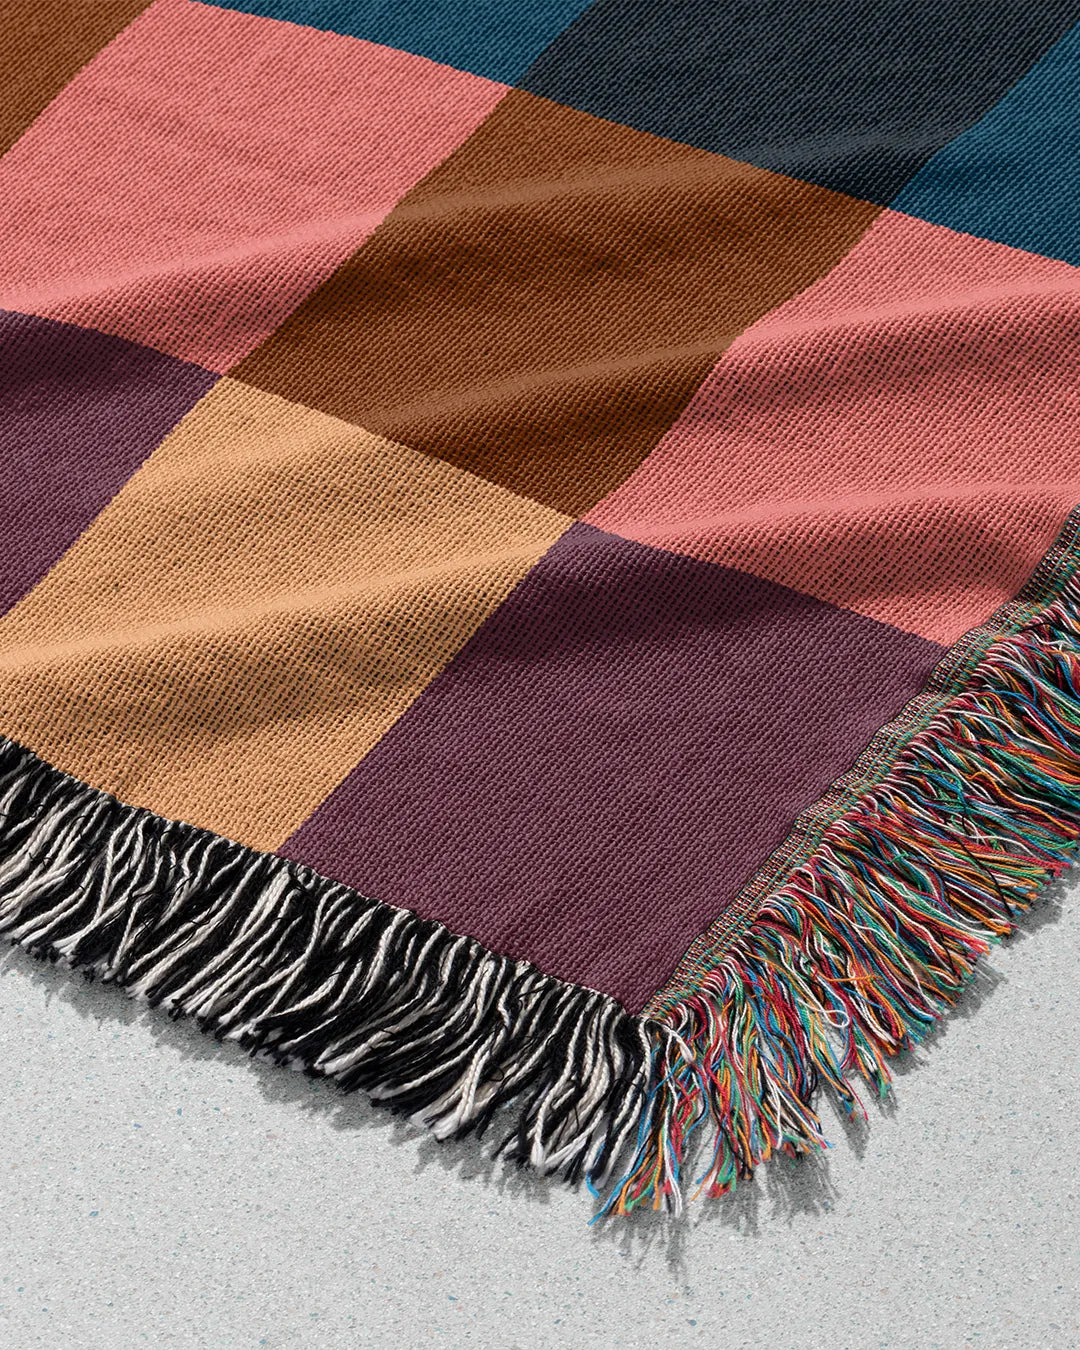 Vibrant Gingham Cotton Woven Throw Blanket with a colorful checker pattern.